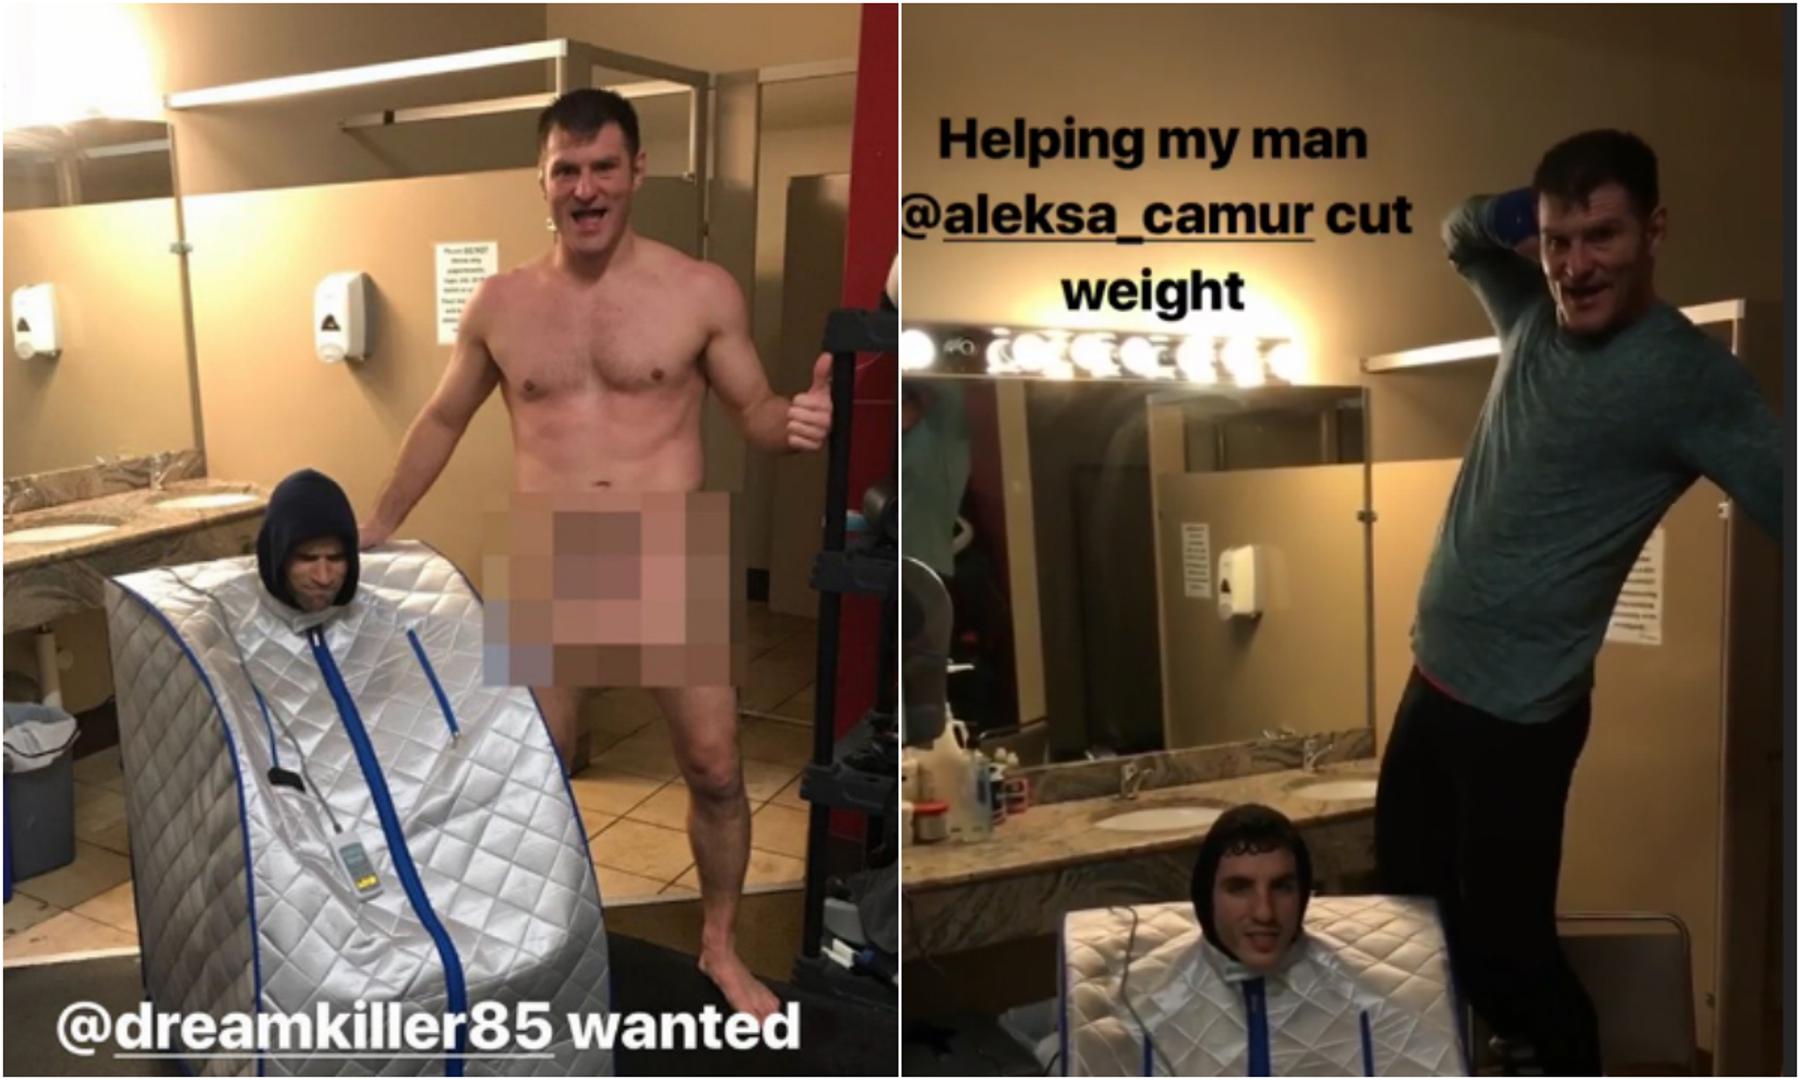 Naked Stipe Miocic helping Aleksa Camur cut weight | Sherdog Forums | UFC,  MMA u0026 Boxing Discussion